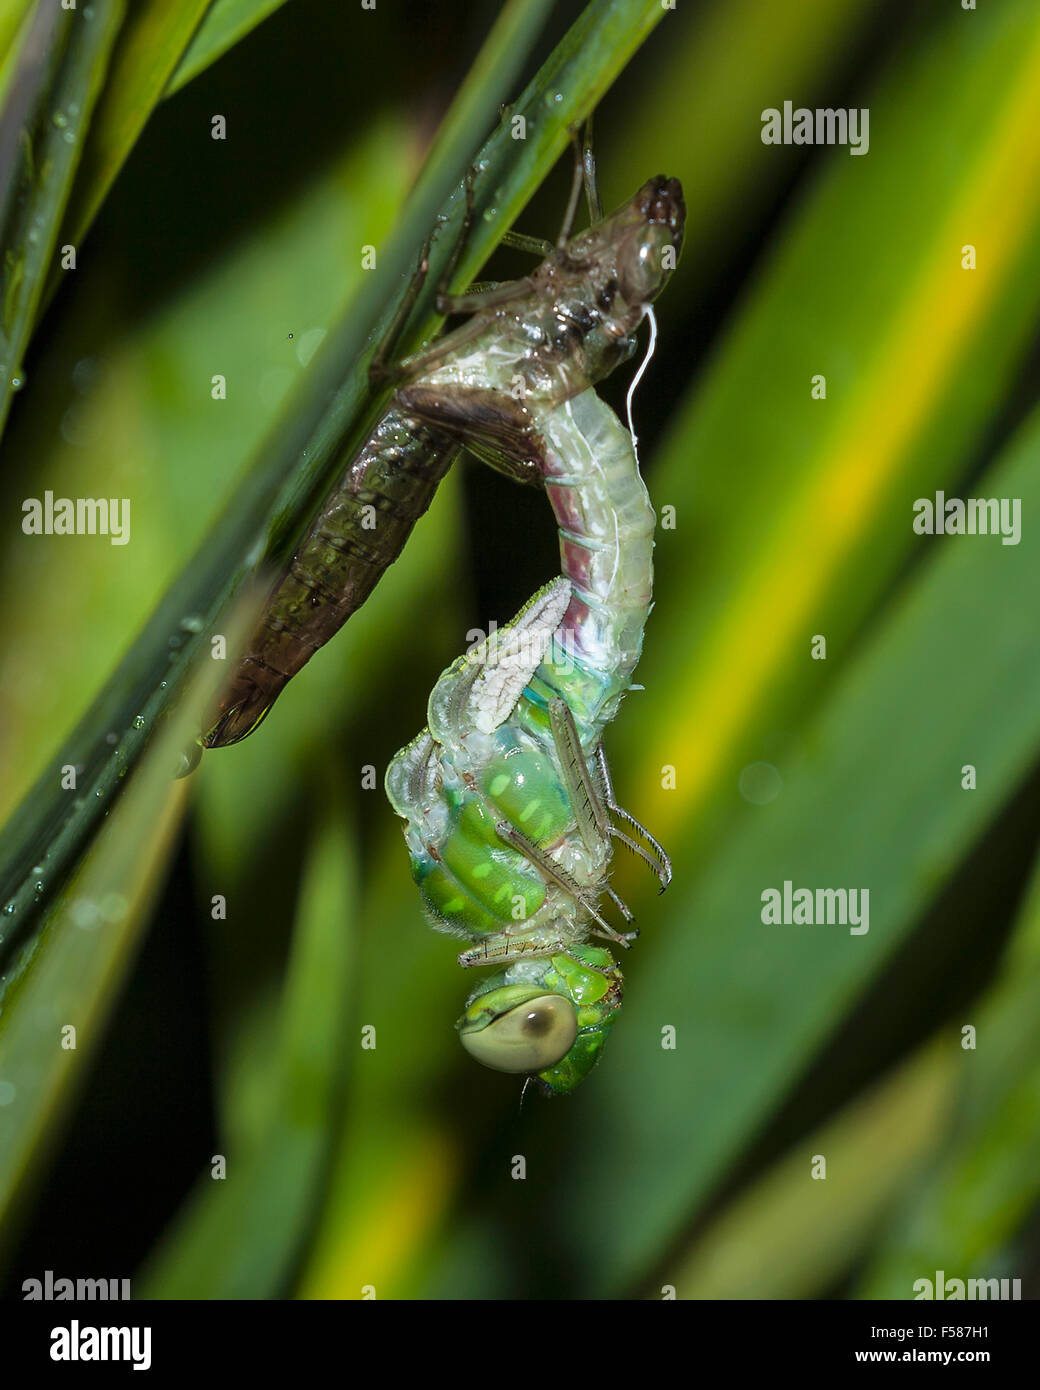 A Green Darner dragonfly emerging from the nymph stage. Stock Photo